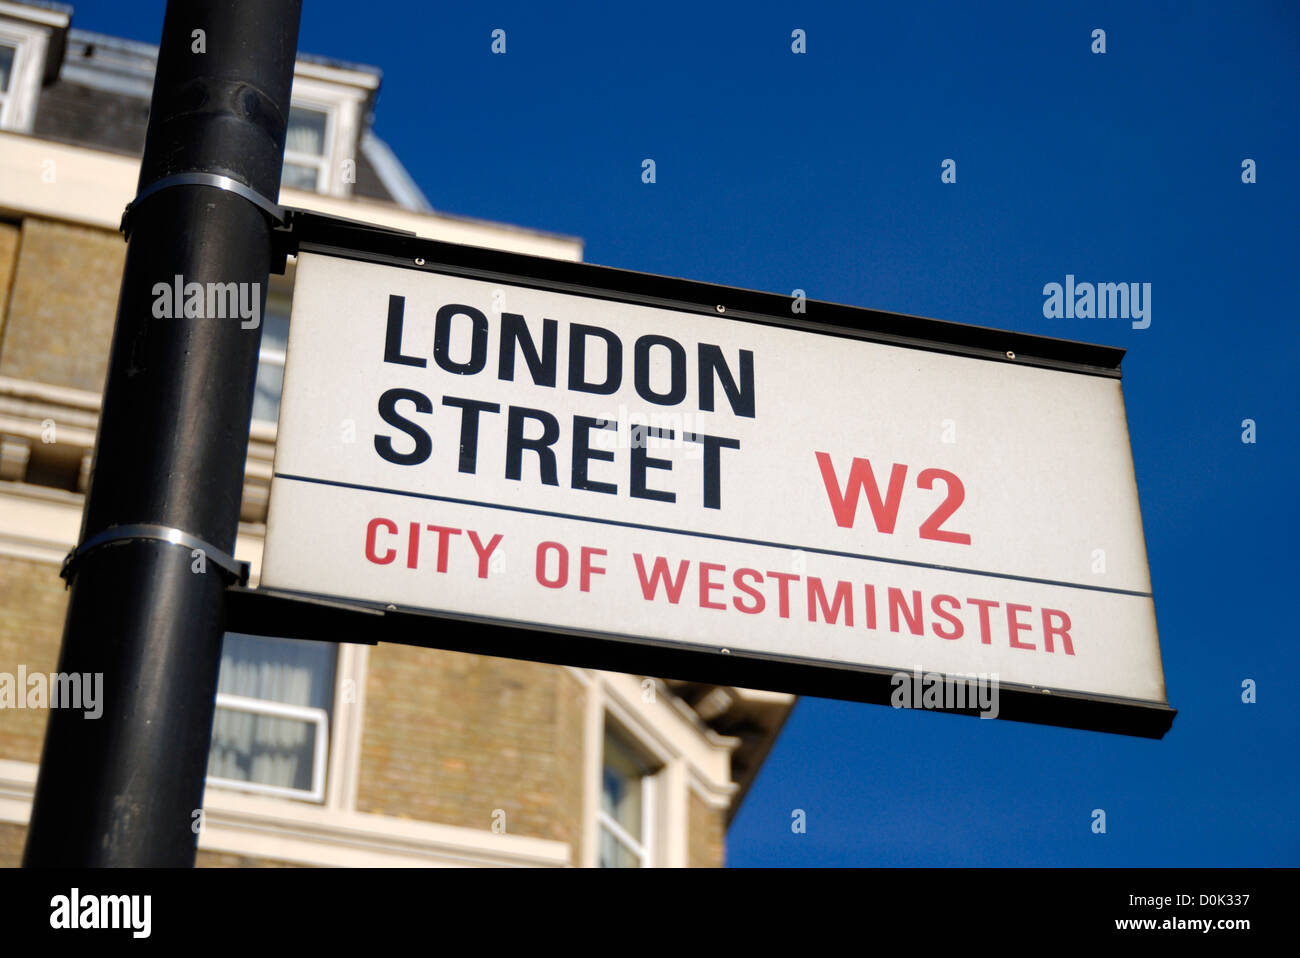 London Street W2 City of Westminster street sign. Stock Photo